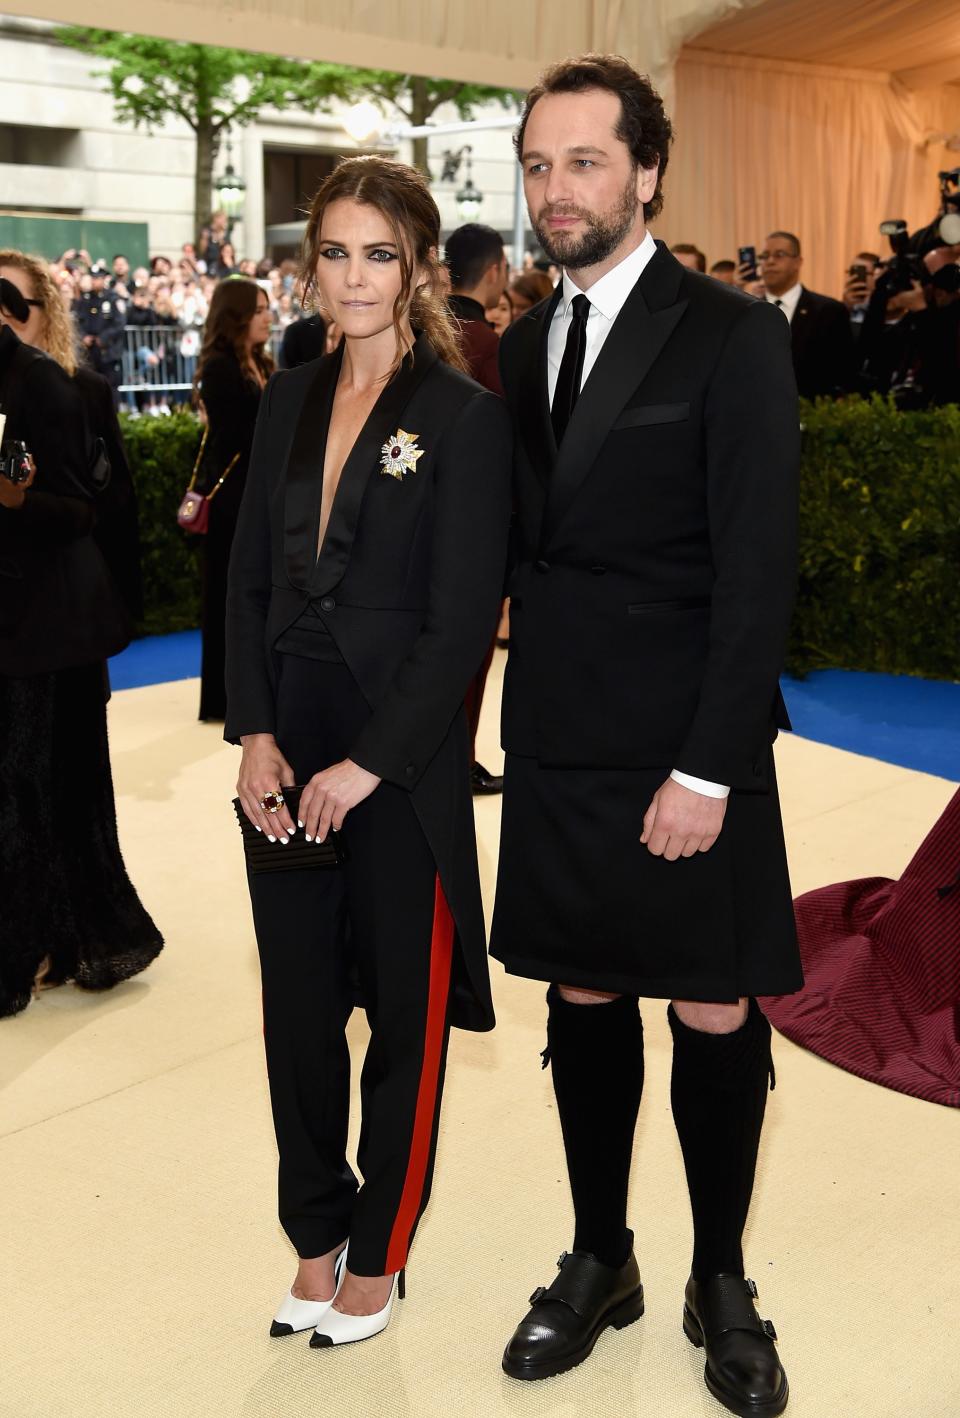 <h1 class="title">Keri Russell in Rag & Bone and David Webb jewelry and Matthew Rhys</h1><cite class="credit">Photo: Getty Images</cite>